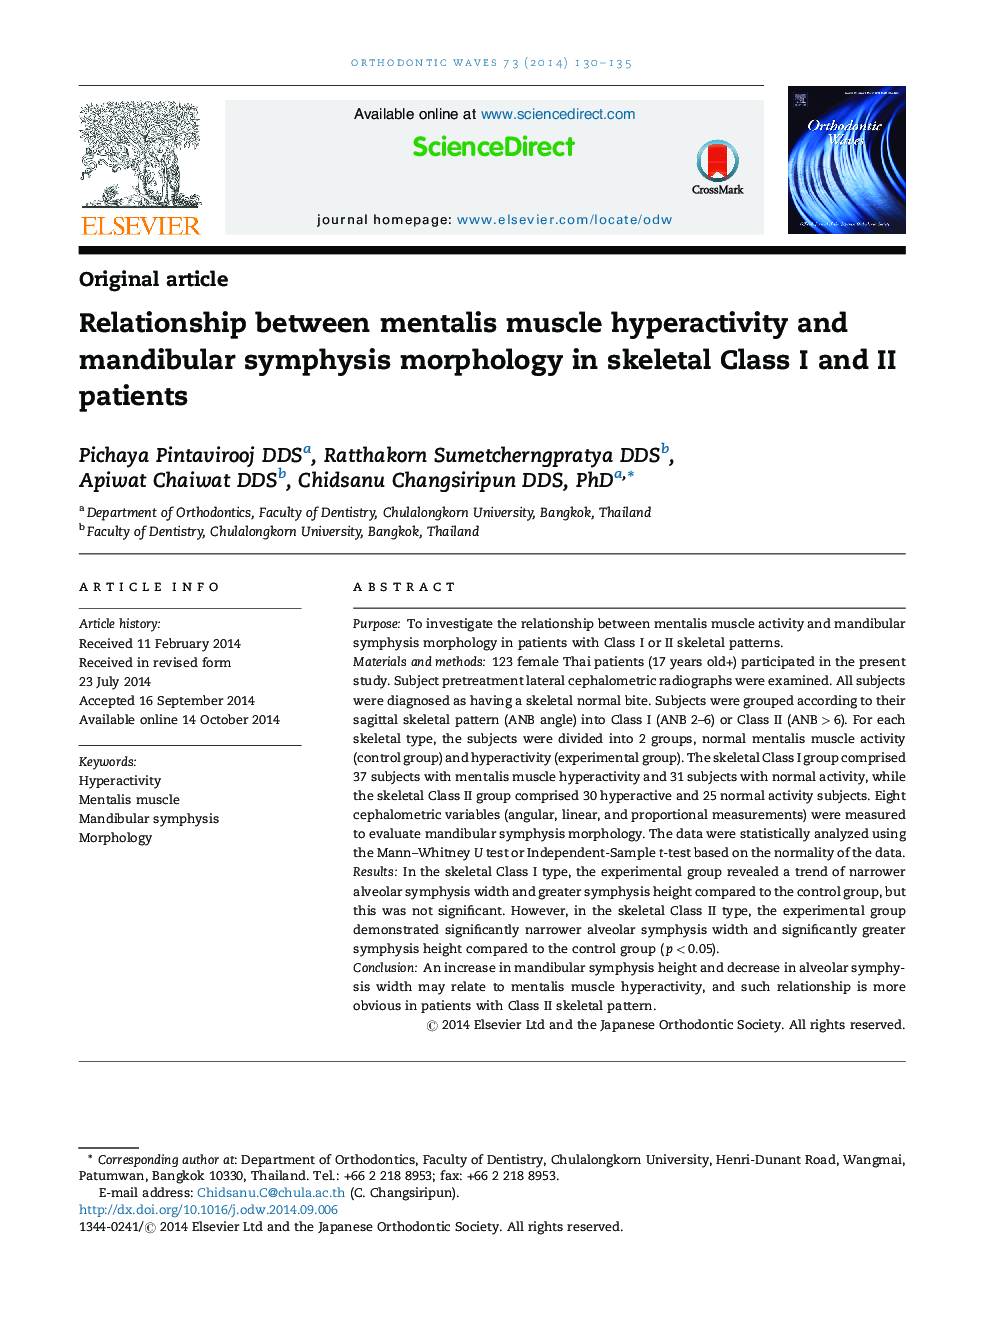 Relationship between mentalis muscle hyperactivity and mandibular symphysis morphology in skeletal Class I and II patients